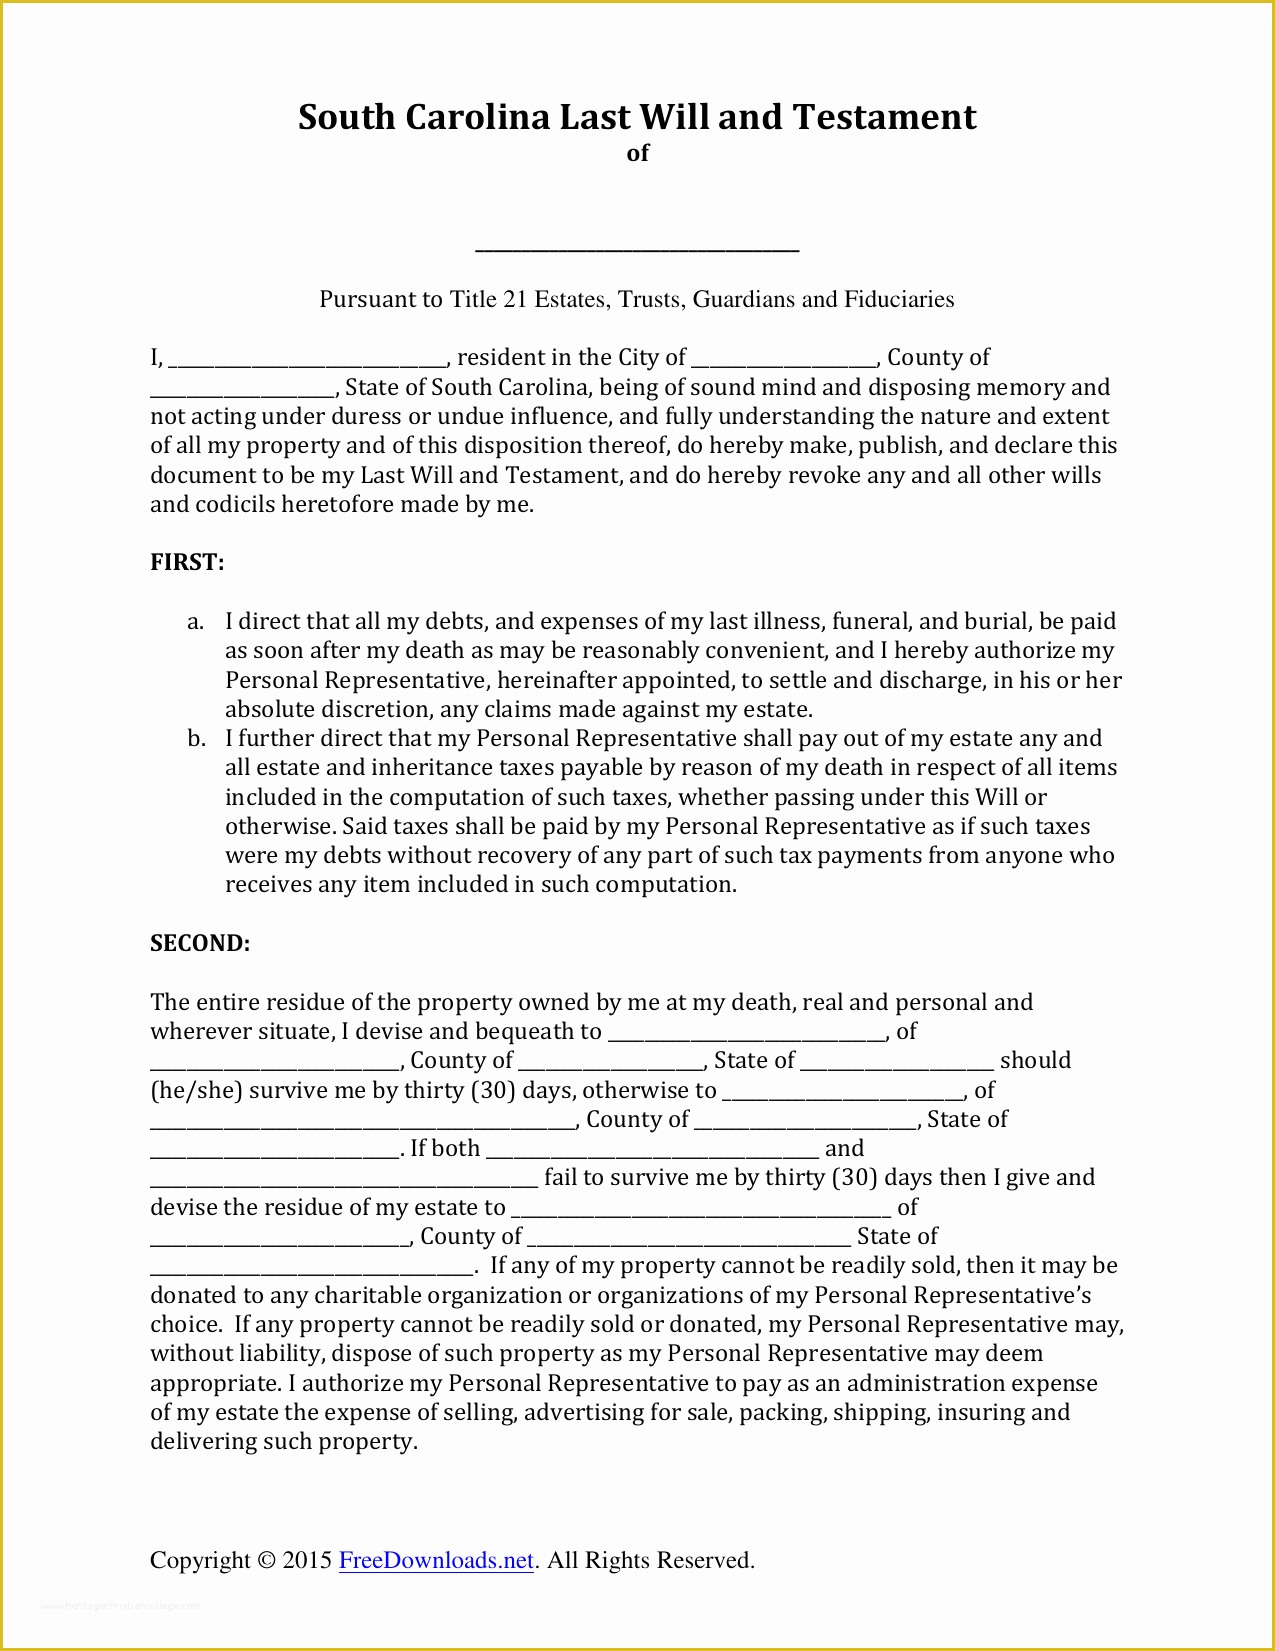 Free Estate Will Template Of Download south Carolina Last Will and Testament form